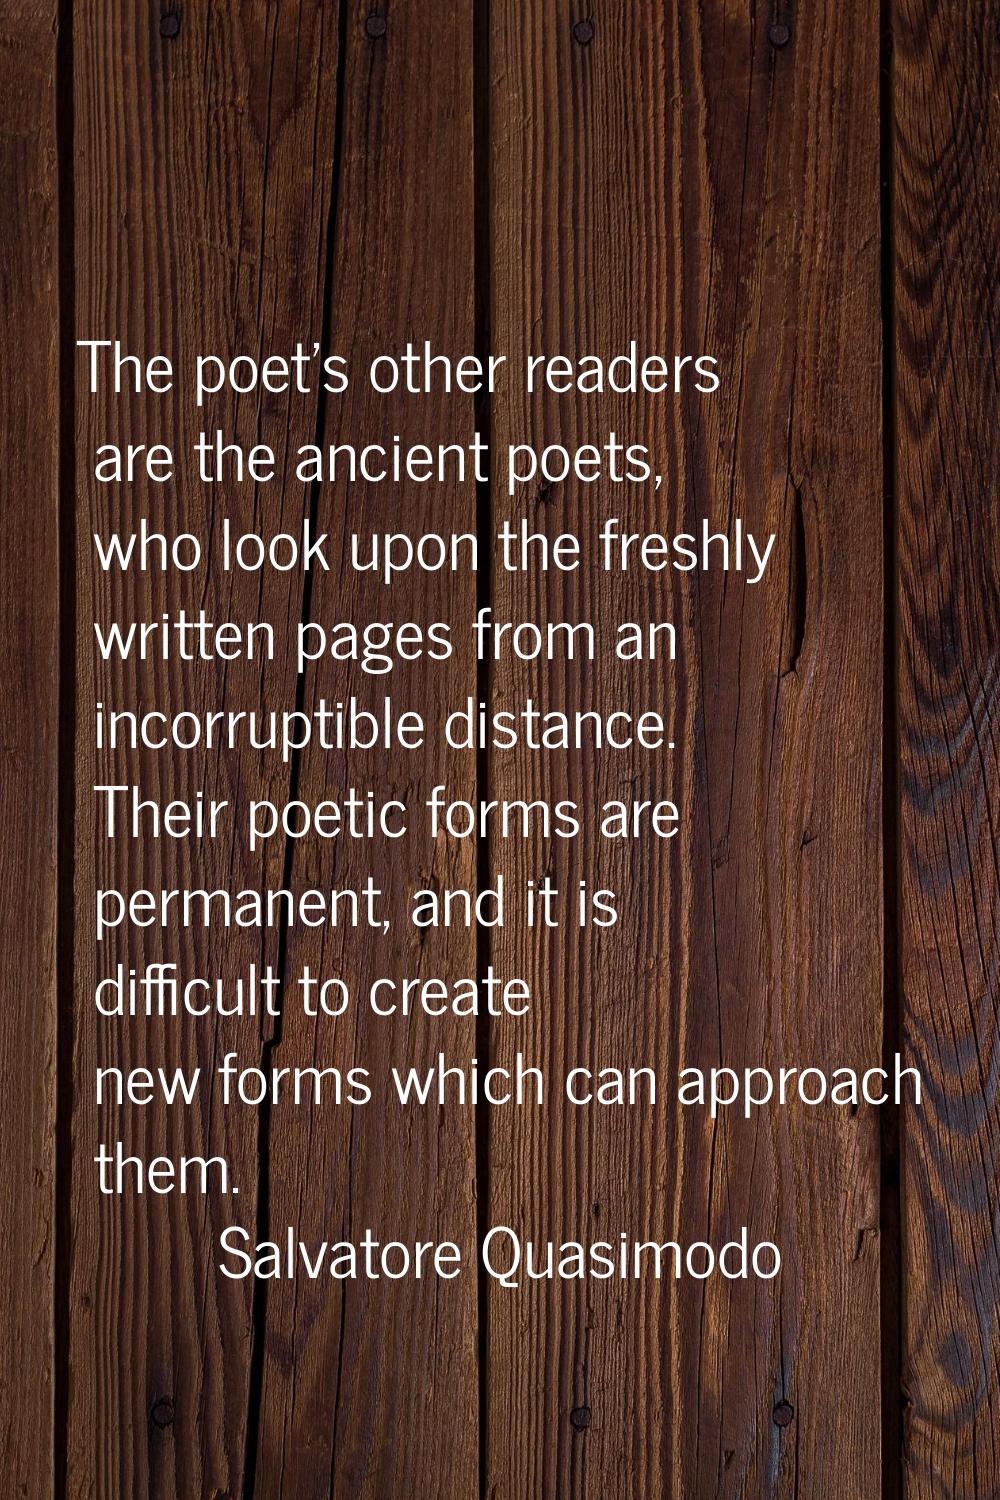 The poet's other readers are the ancient poets, who look upon the freshly written pages from an inc